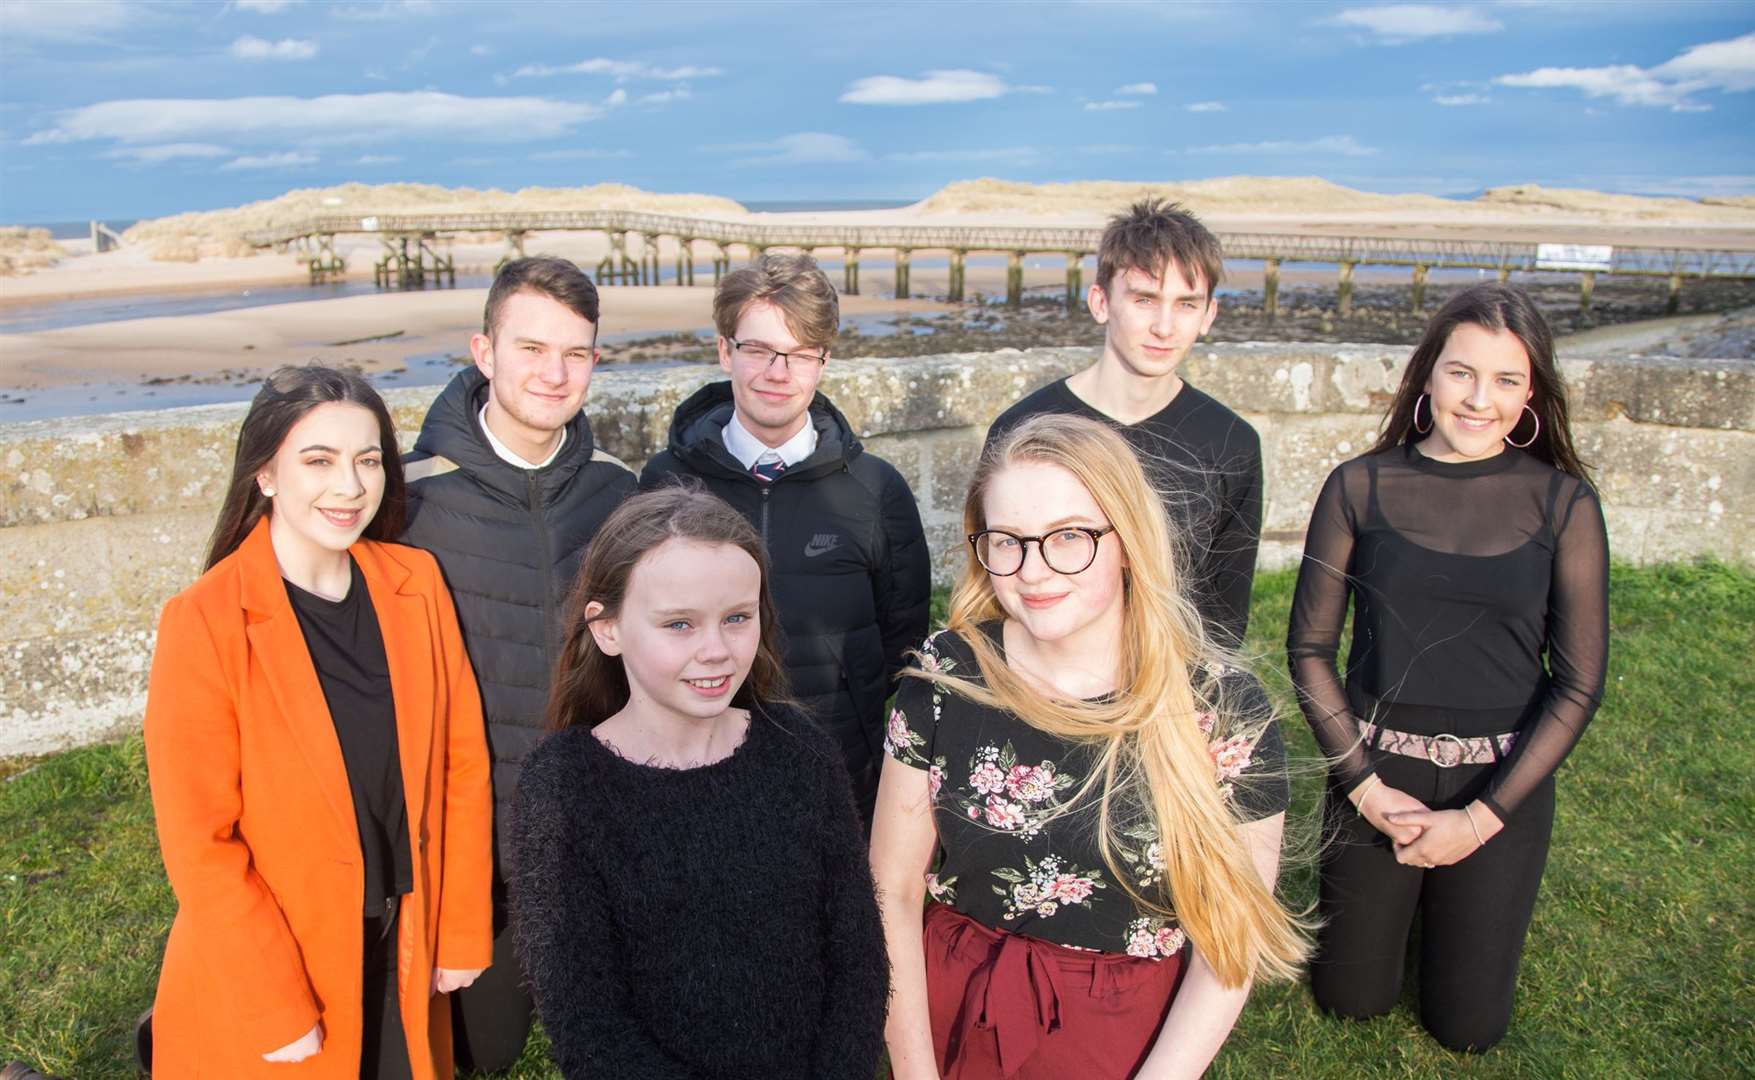 Classically trained singers (from left) Eilidh Ross, Callum Baker, Matthew Hamilton, Ewan Kendrick and Keryn Stronach with Erin Grant (front left) and Amy Anderson (front right) who will be taking part in a concert to raise funds for the East Beach Bridge Renovation.Picture: Becky Saunderson. Image No. 043527.